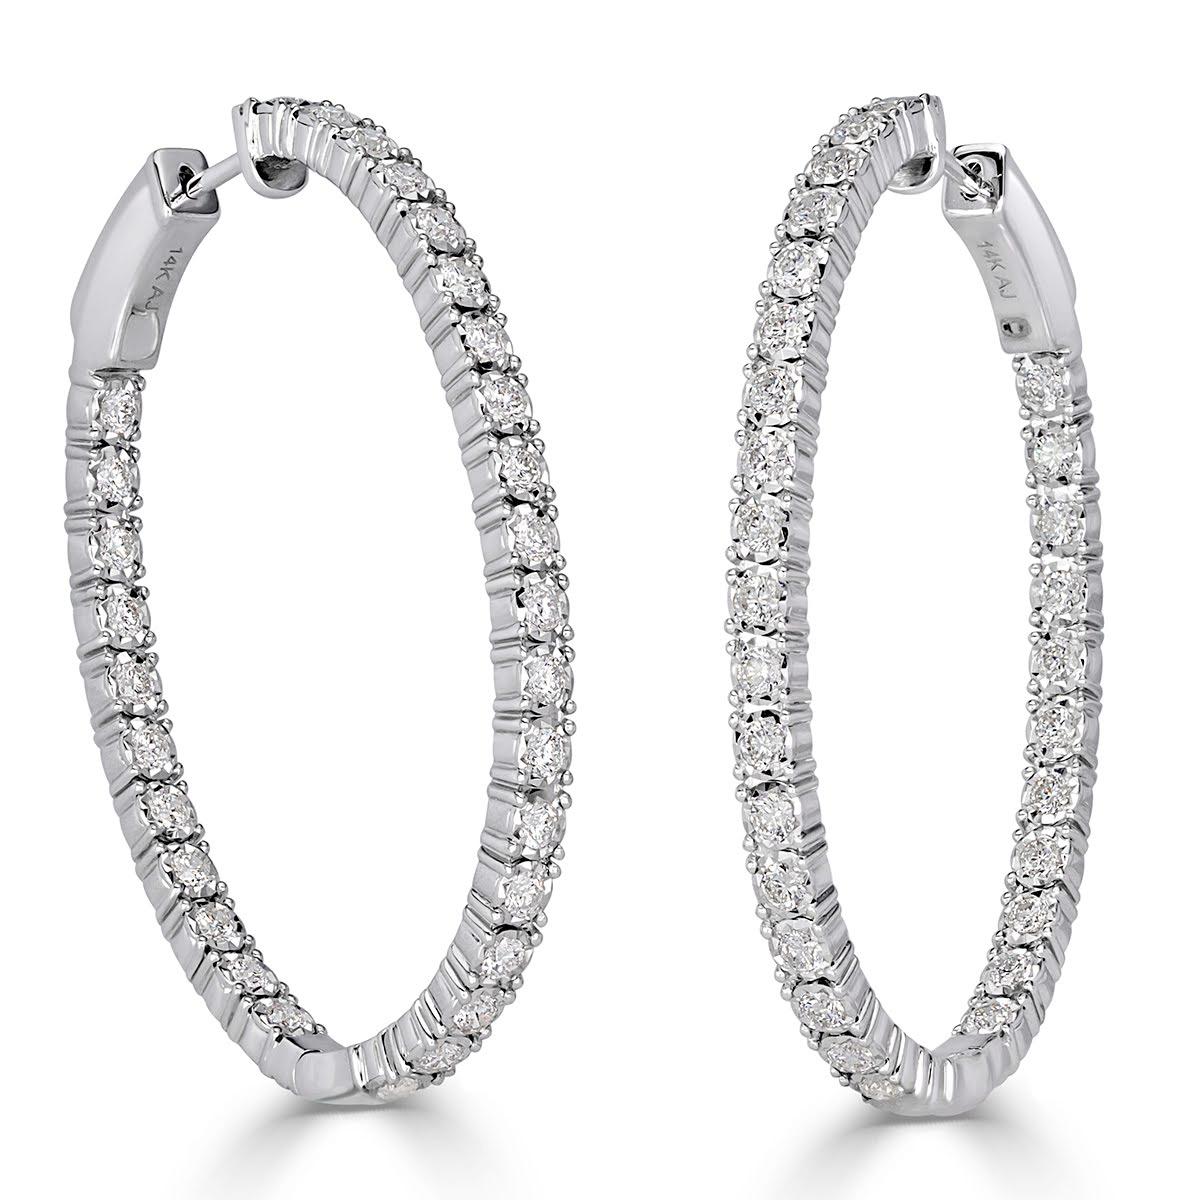 This stylish pair of diamond hoop earrings showcases 1.98ct of round brilliant cut diamonds set in 14k white gold. The diamonds are graded at E-F in color, VS2-SI1 in clarity. For extra sparkle, the diamonds are set on the outside as well as on the